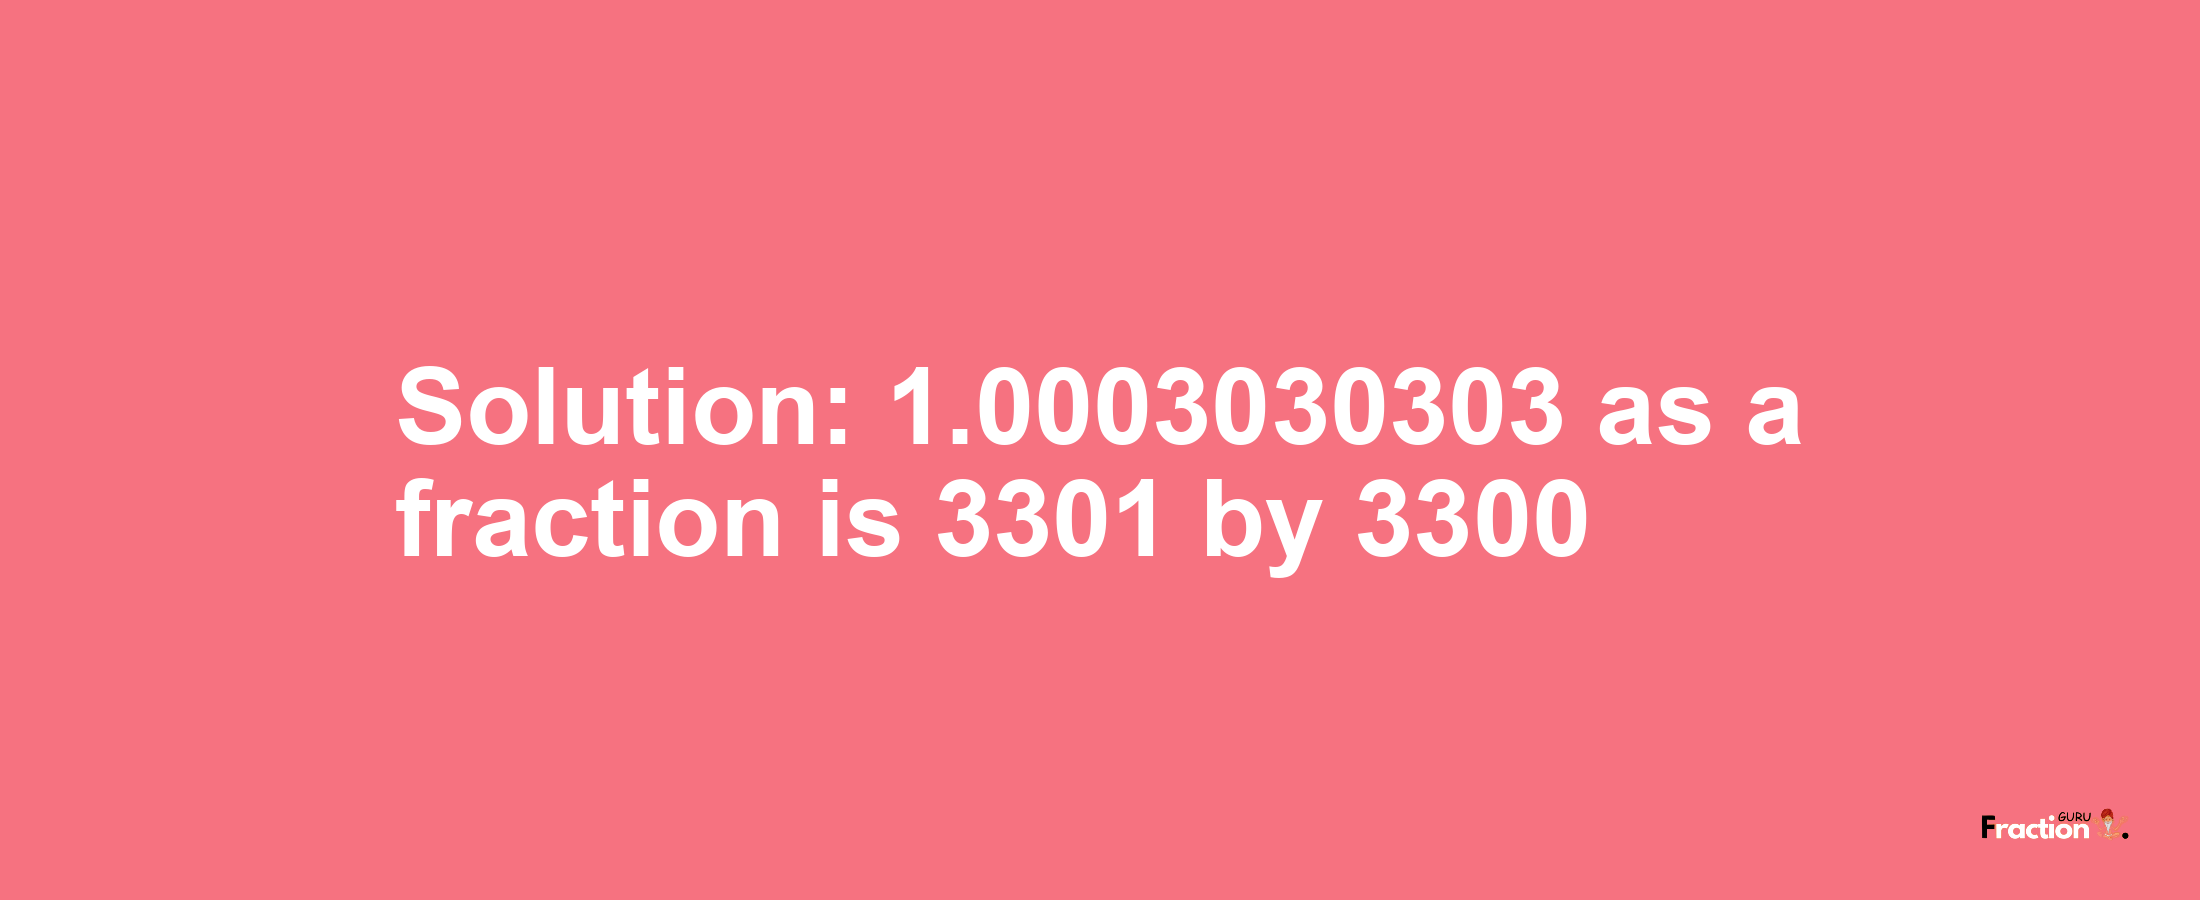 Solution:1.0003030303 as a fraction is 3301/3300